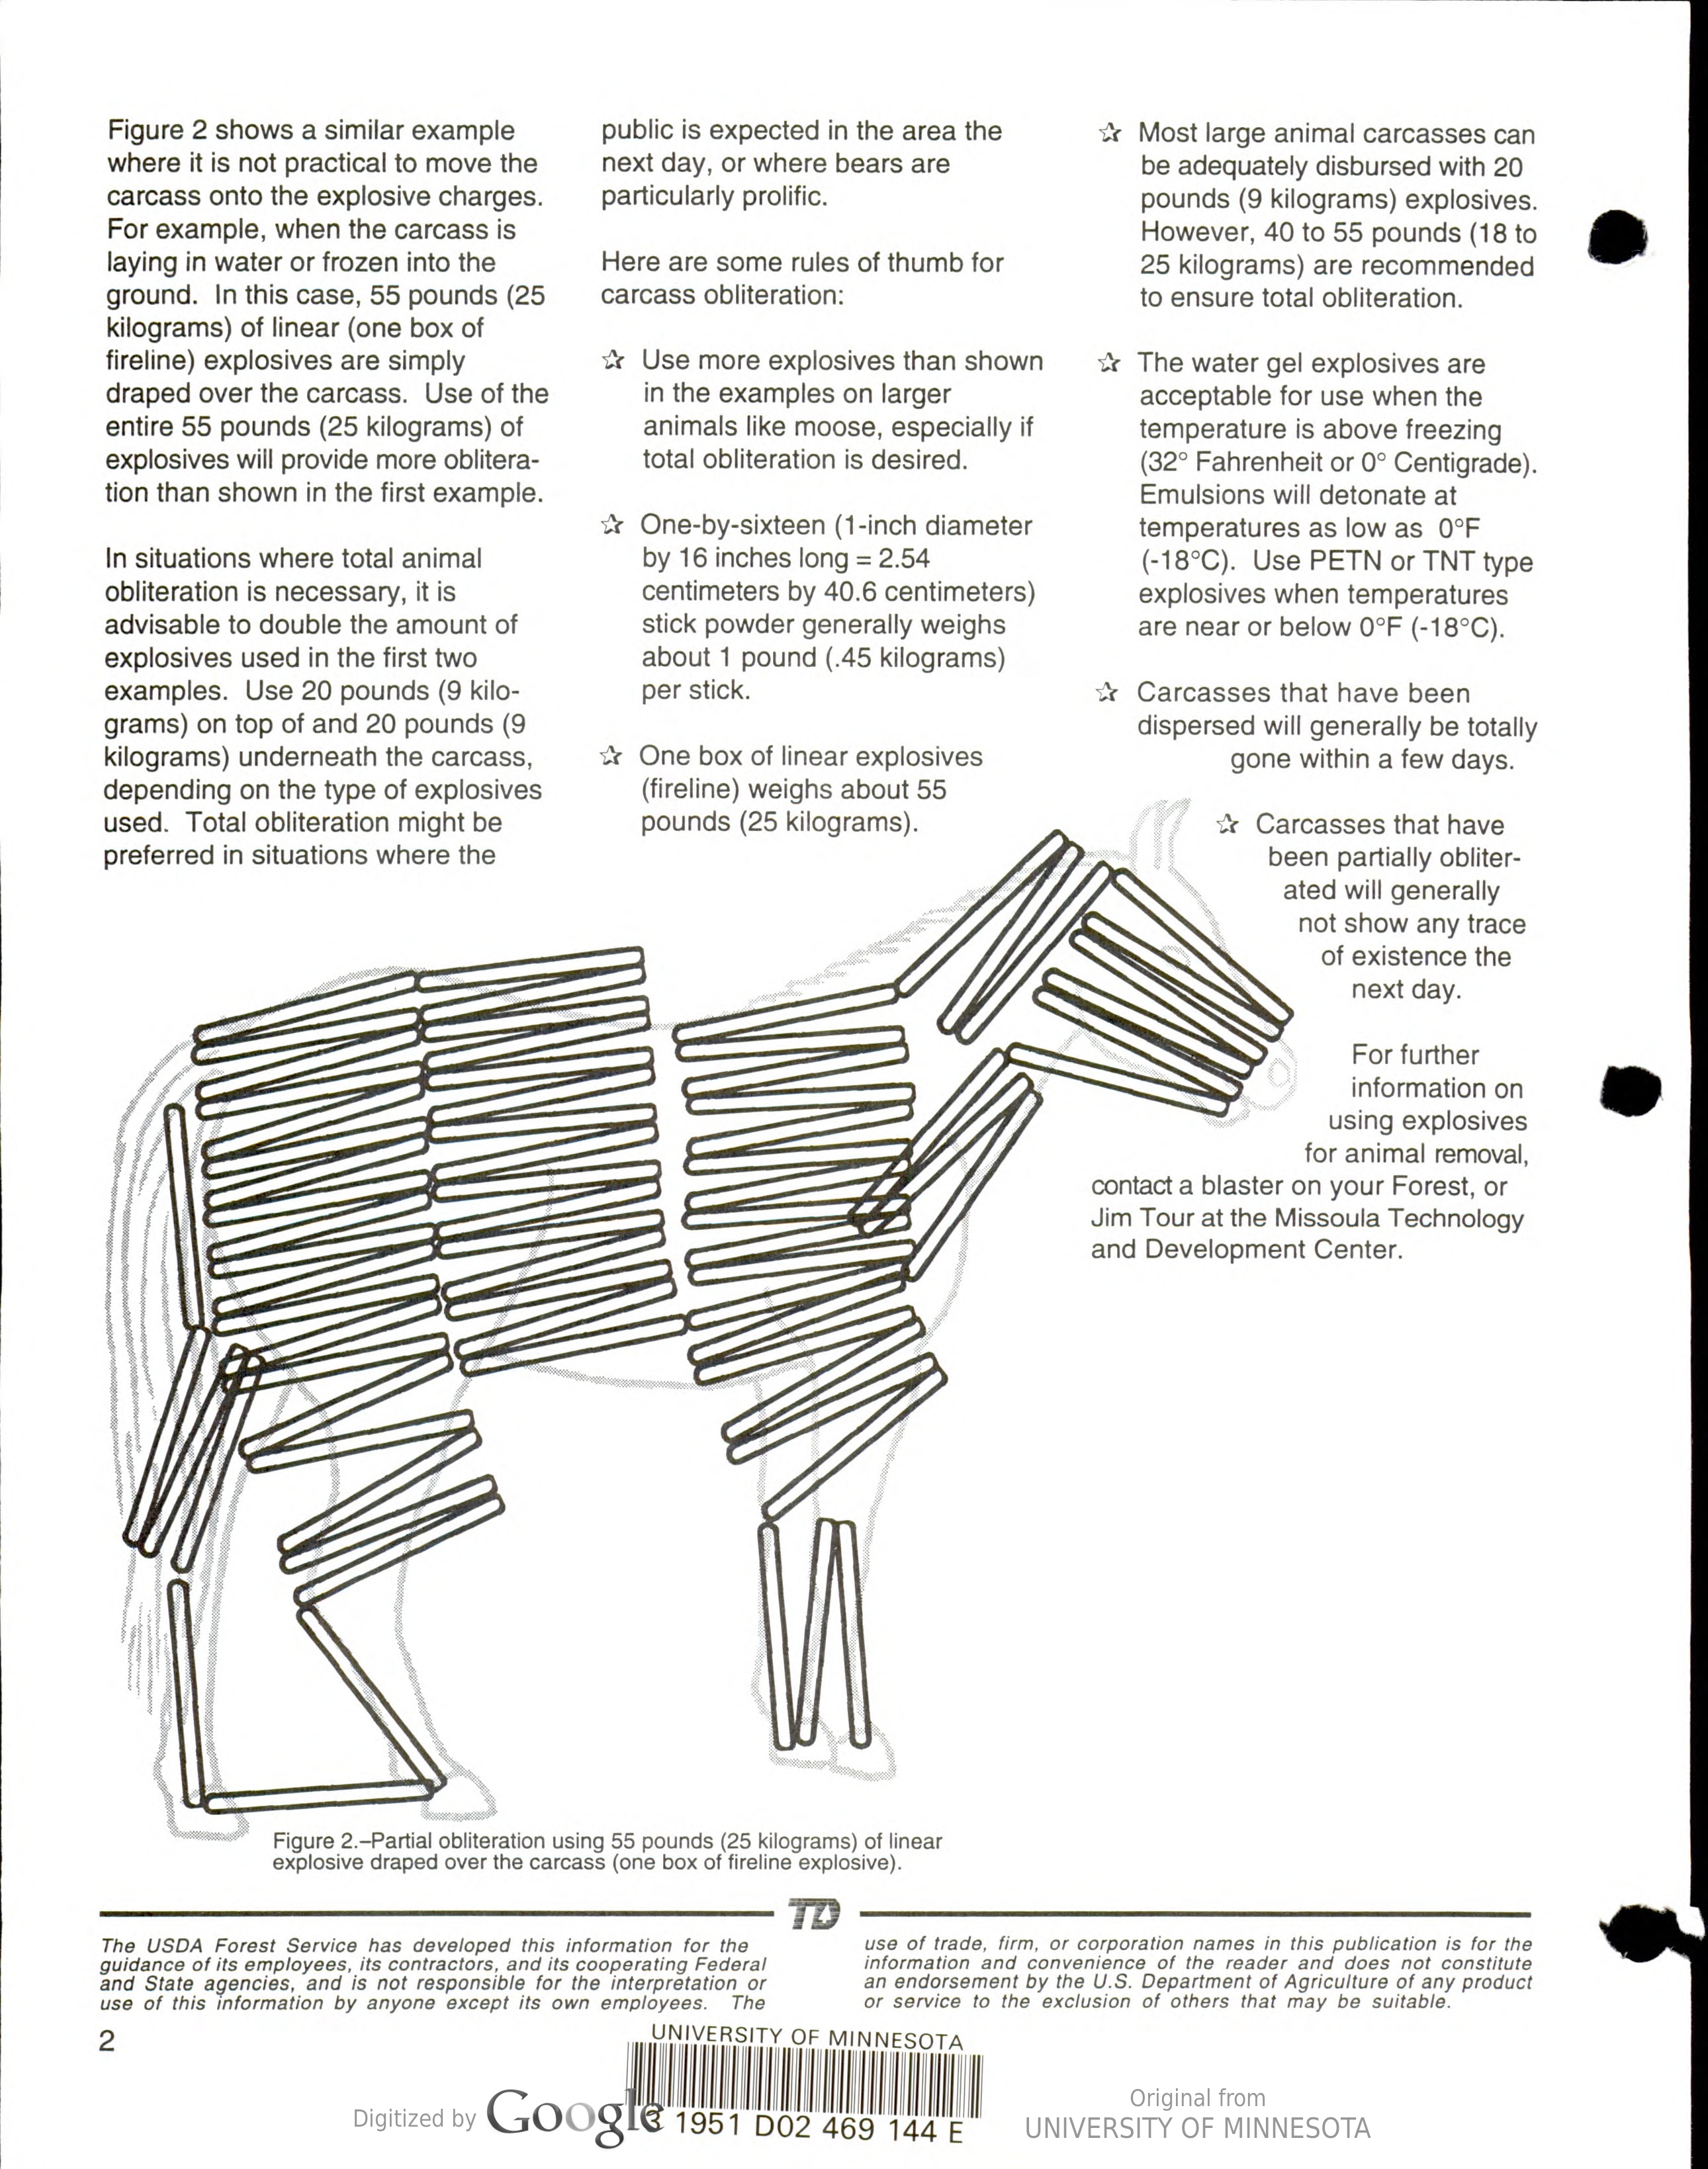 a forest service manual instructing on how to detonate livestock to prevent attracting bears, page 2, with a outline of a horse and an example pattern of more generous dynamite placement